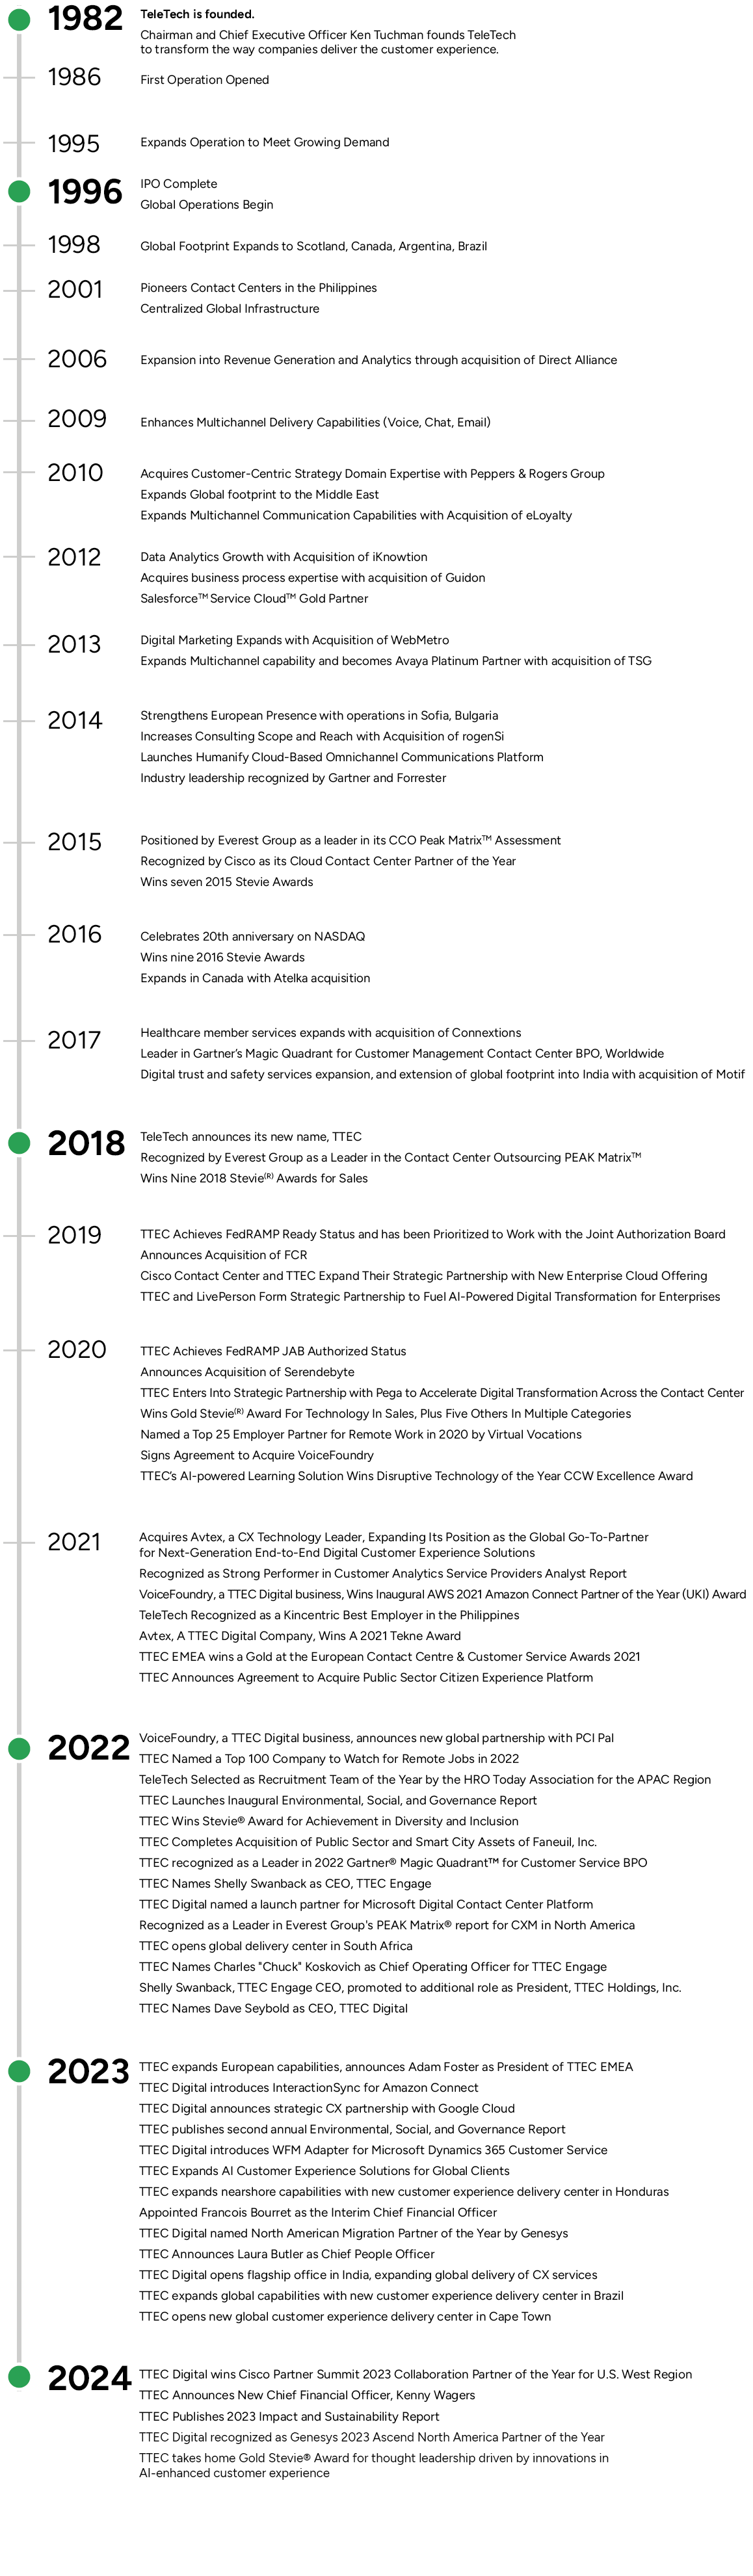 about TTEC timeline graphic